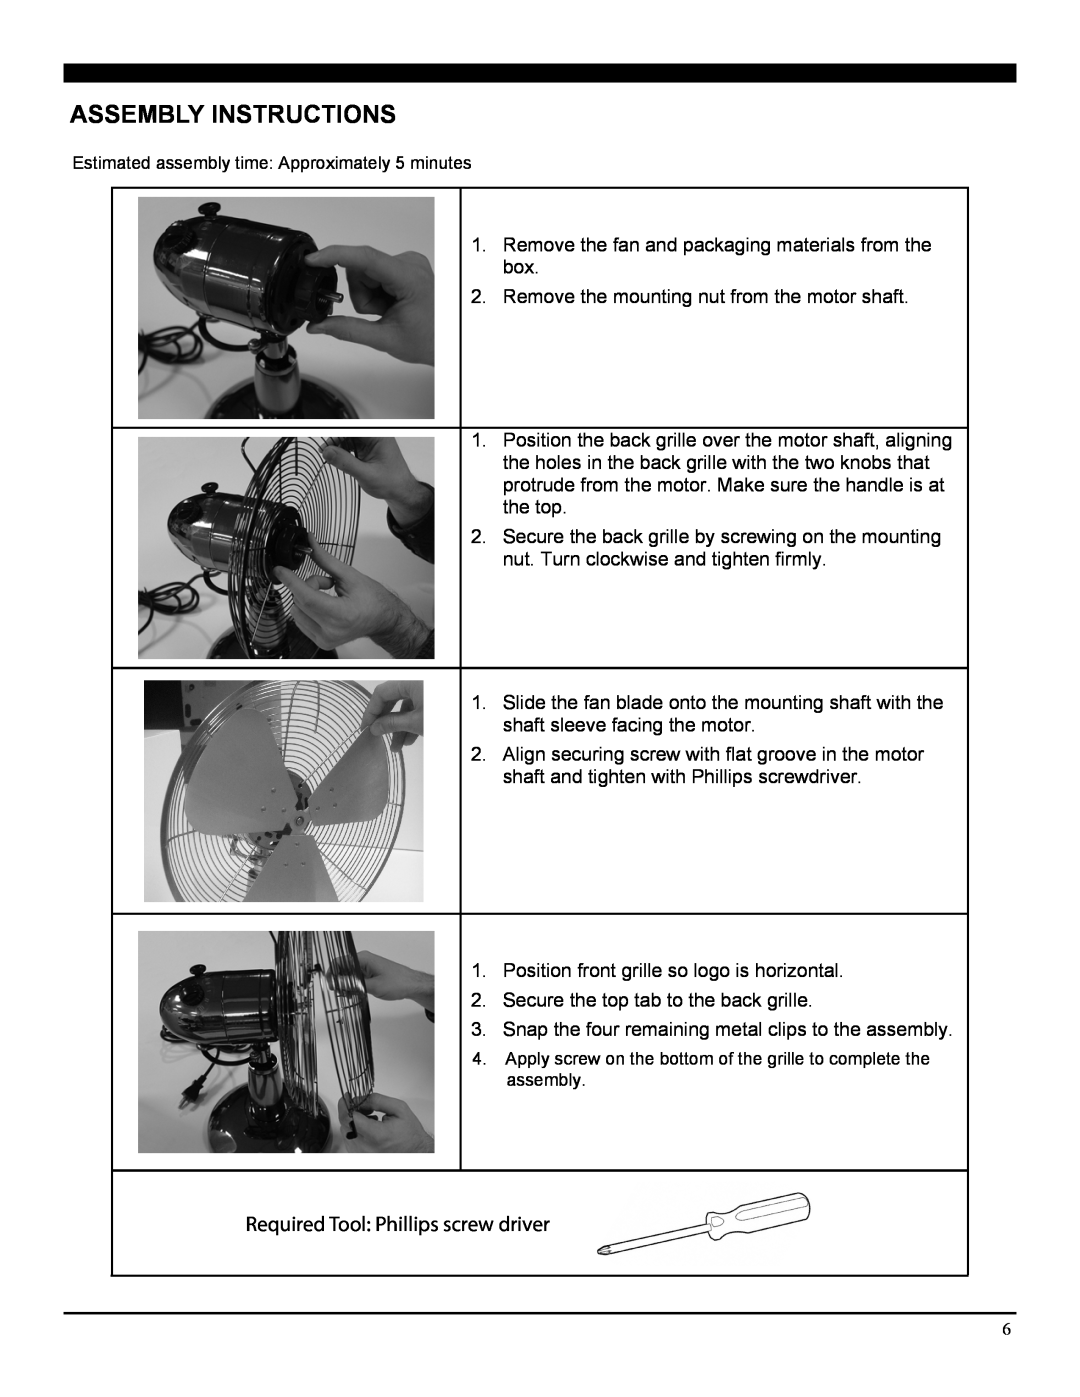 Soleus Air FT1-30-41 operating instructions Assembly Instructions, Required Tool Phillips screw driver 